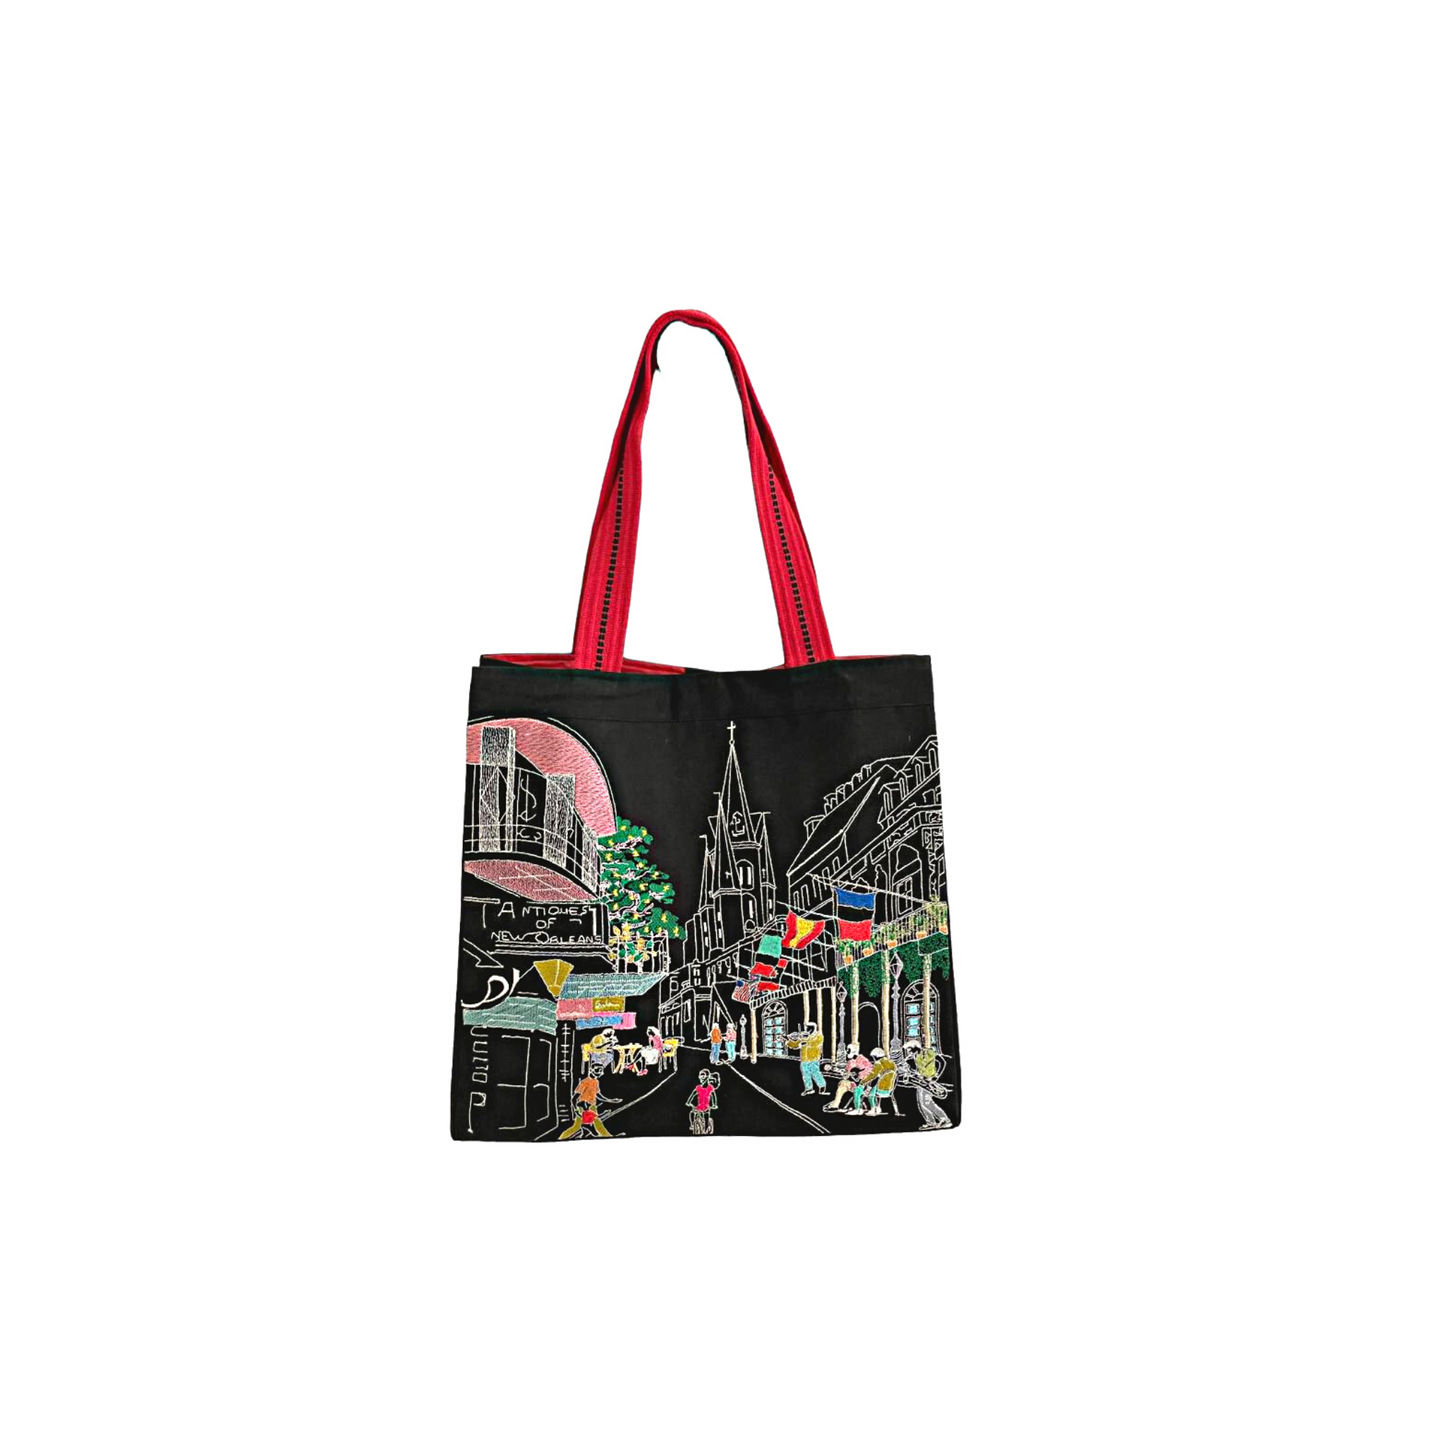 Embroidered City Artistry New Orleans Tote Bag